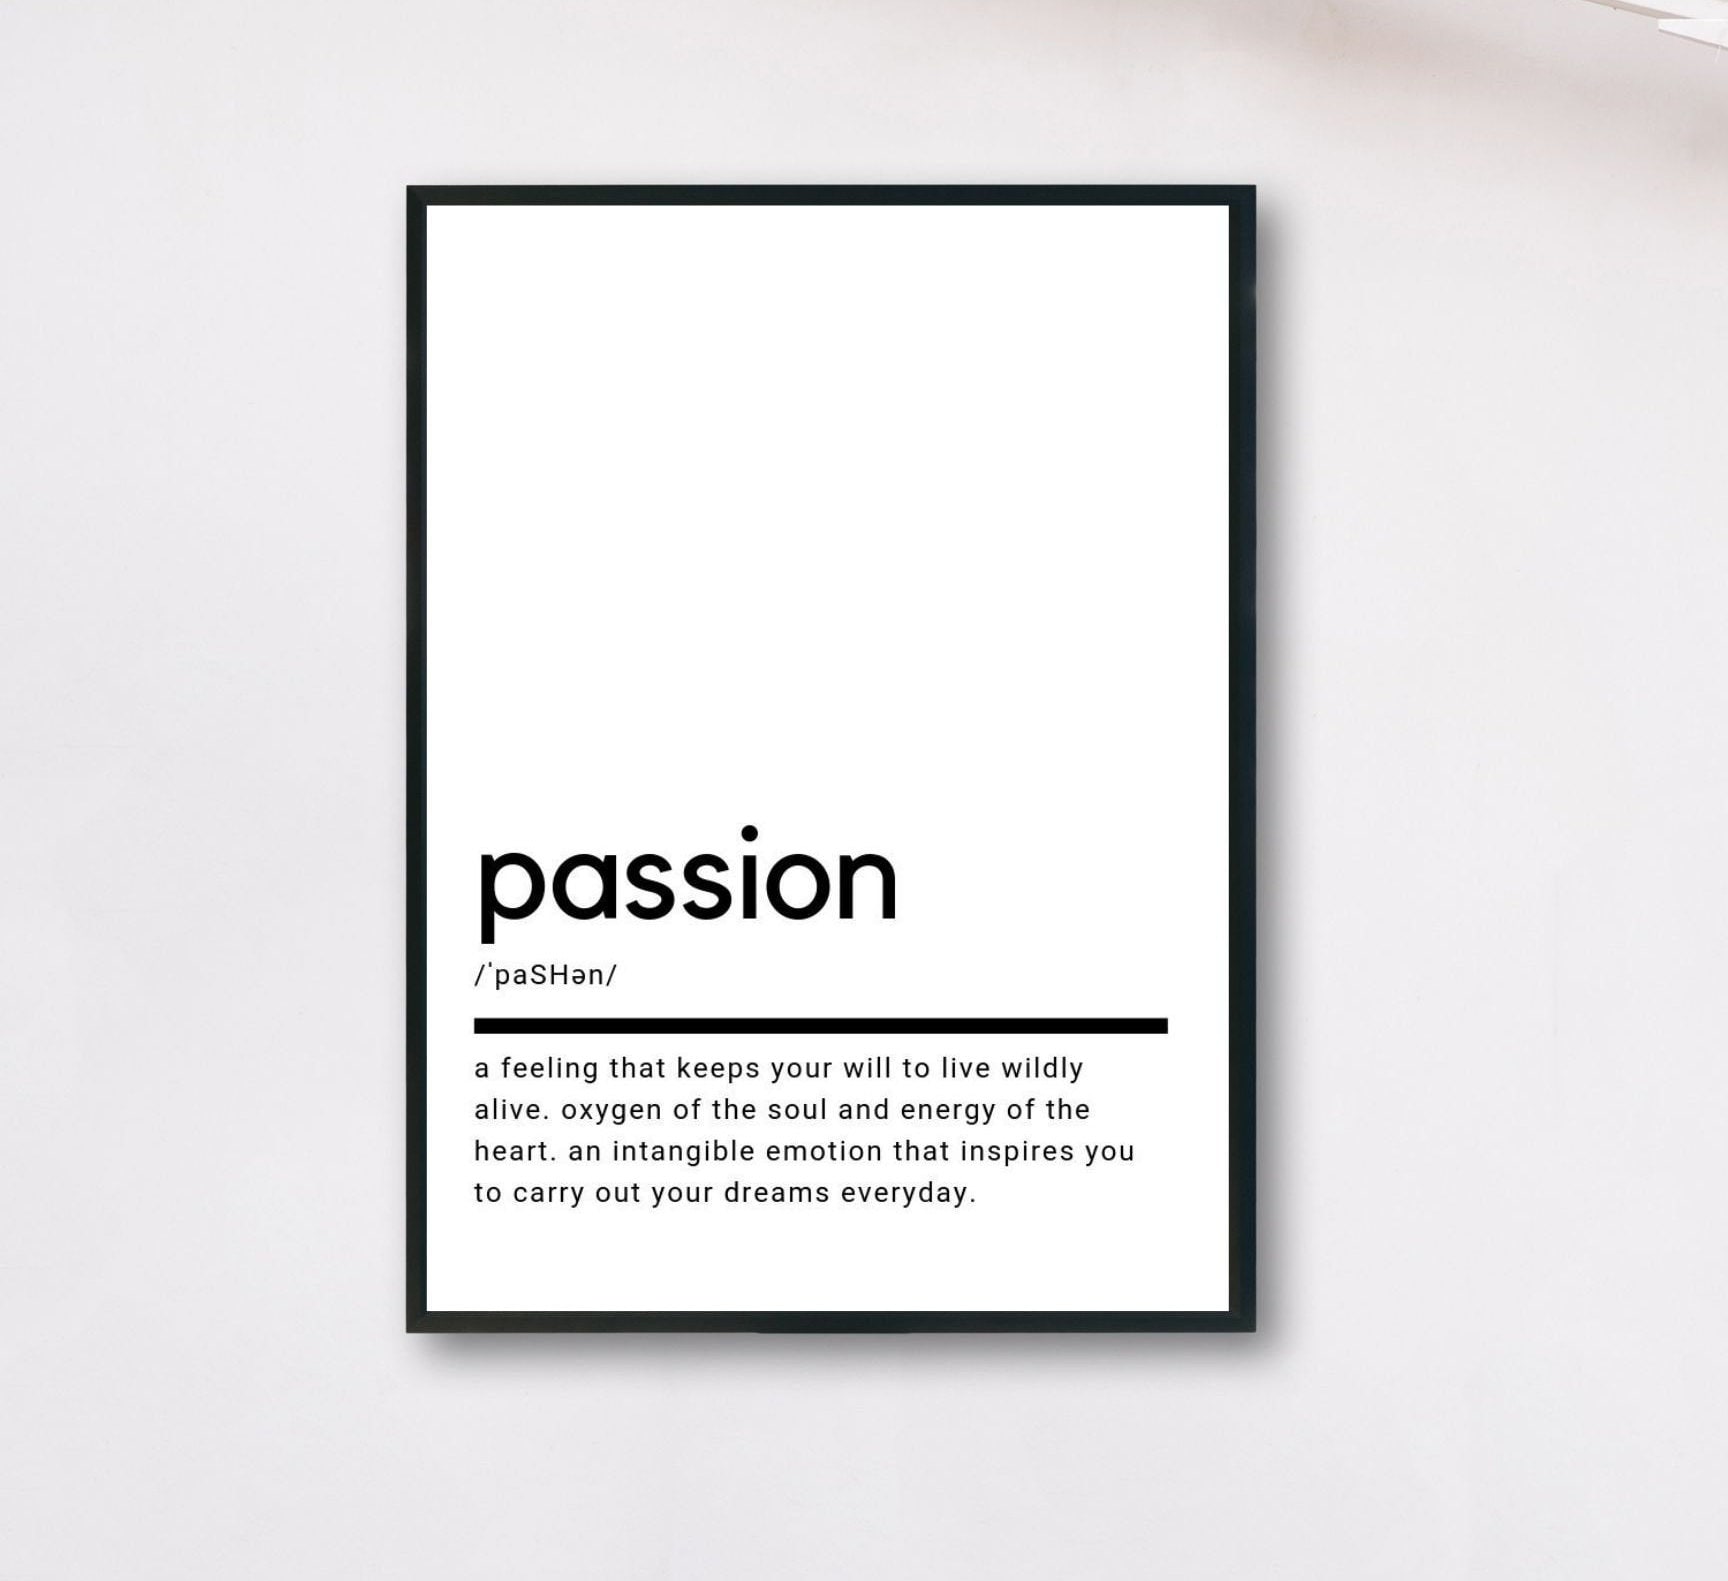 Passion meaning